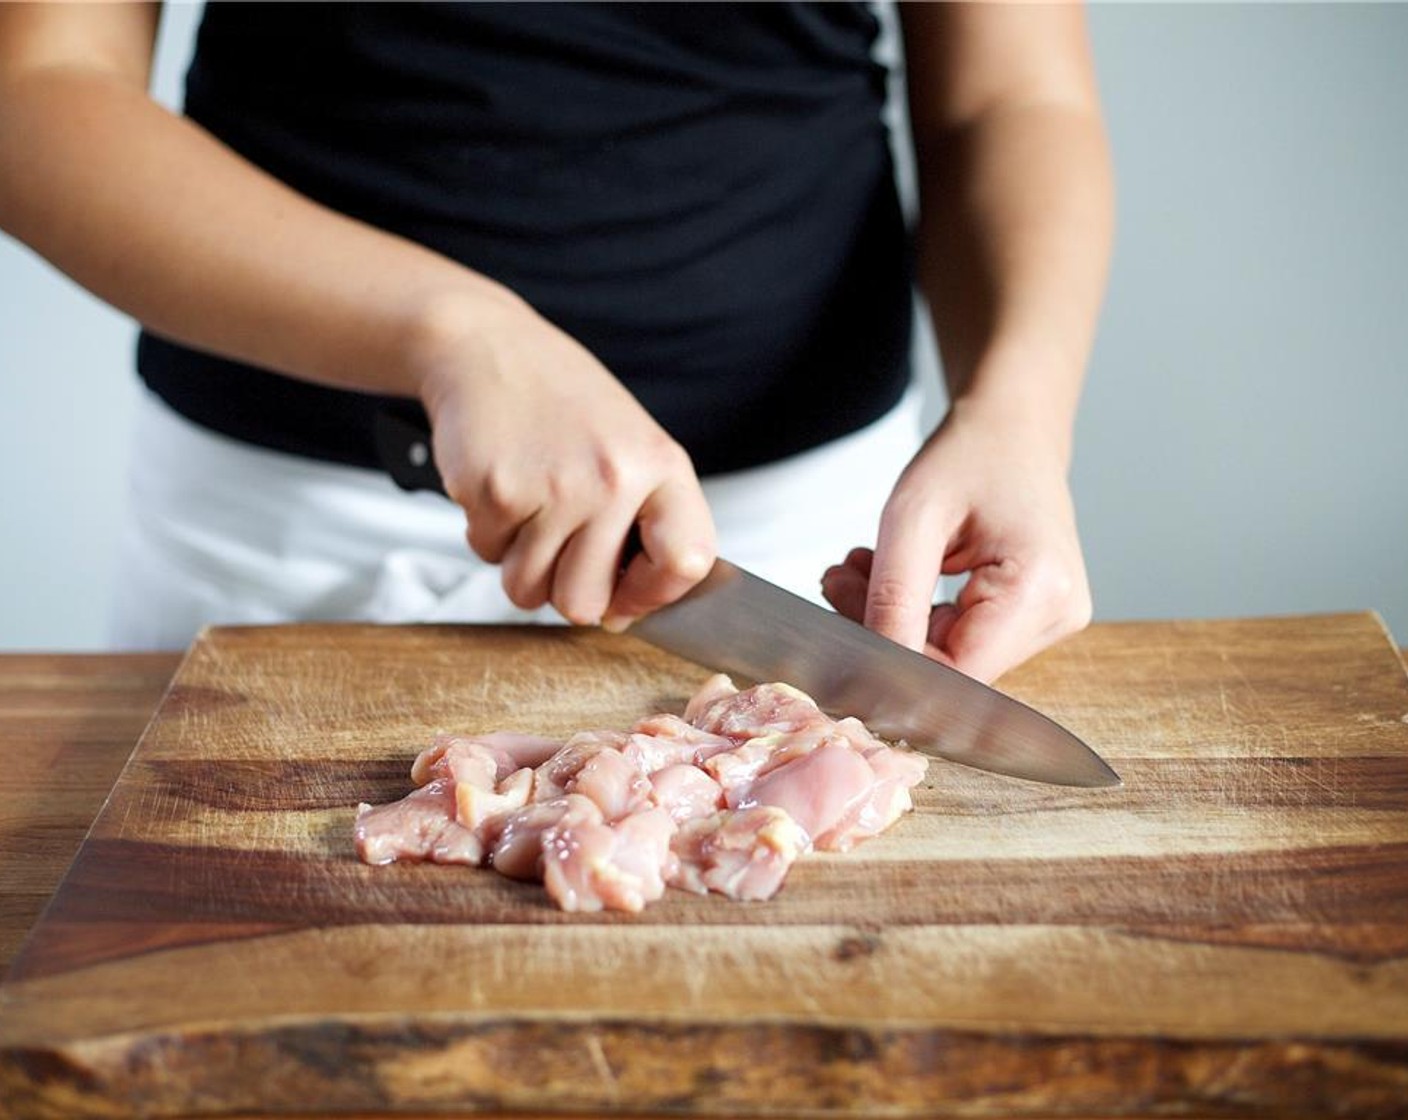 step 4 Pat dry the Boneless, Skinless Chicken Thighs (4) with a paper towel. Cut into one inch cubes, and set aside.